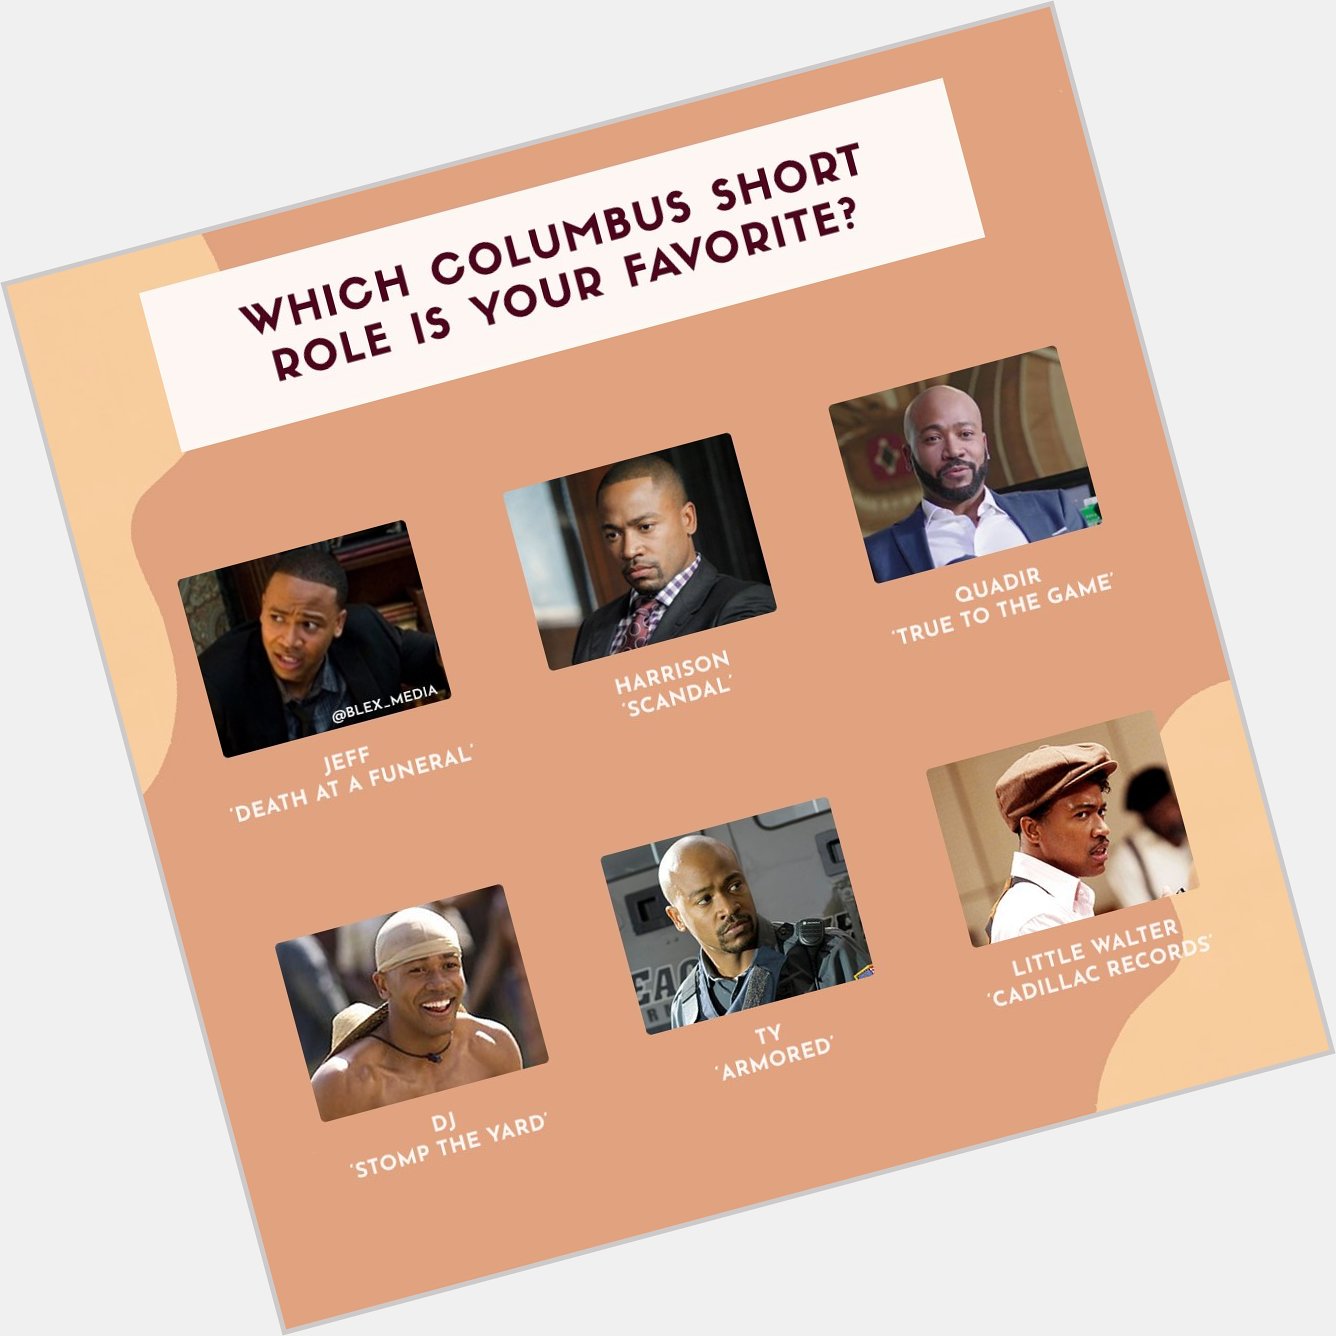 Happy Birthday Columbus Short! Which role out of these 6 roles of his is your favorite? 